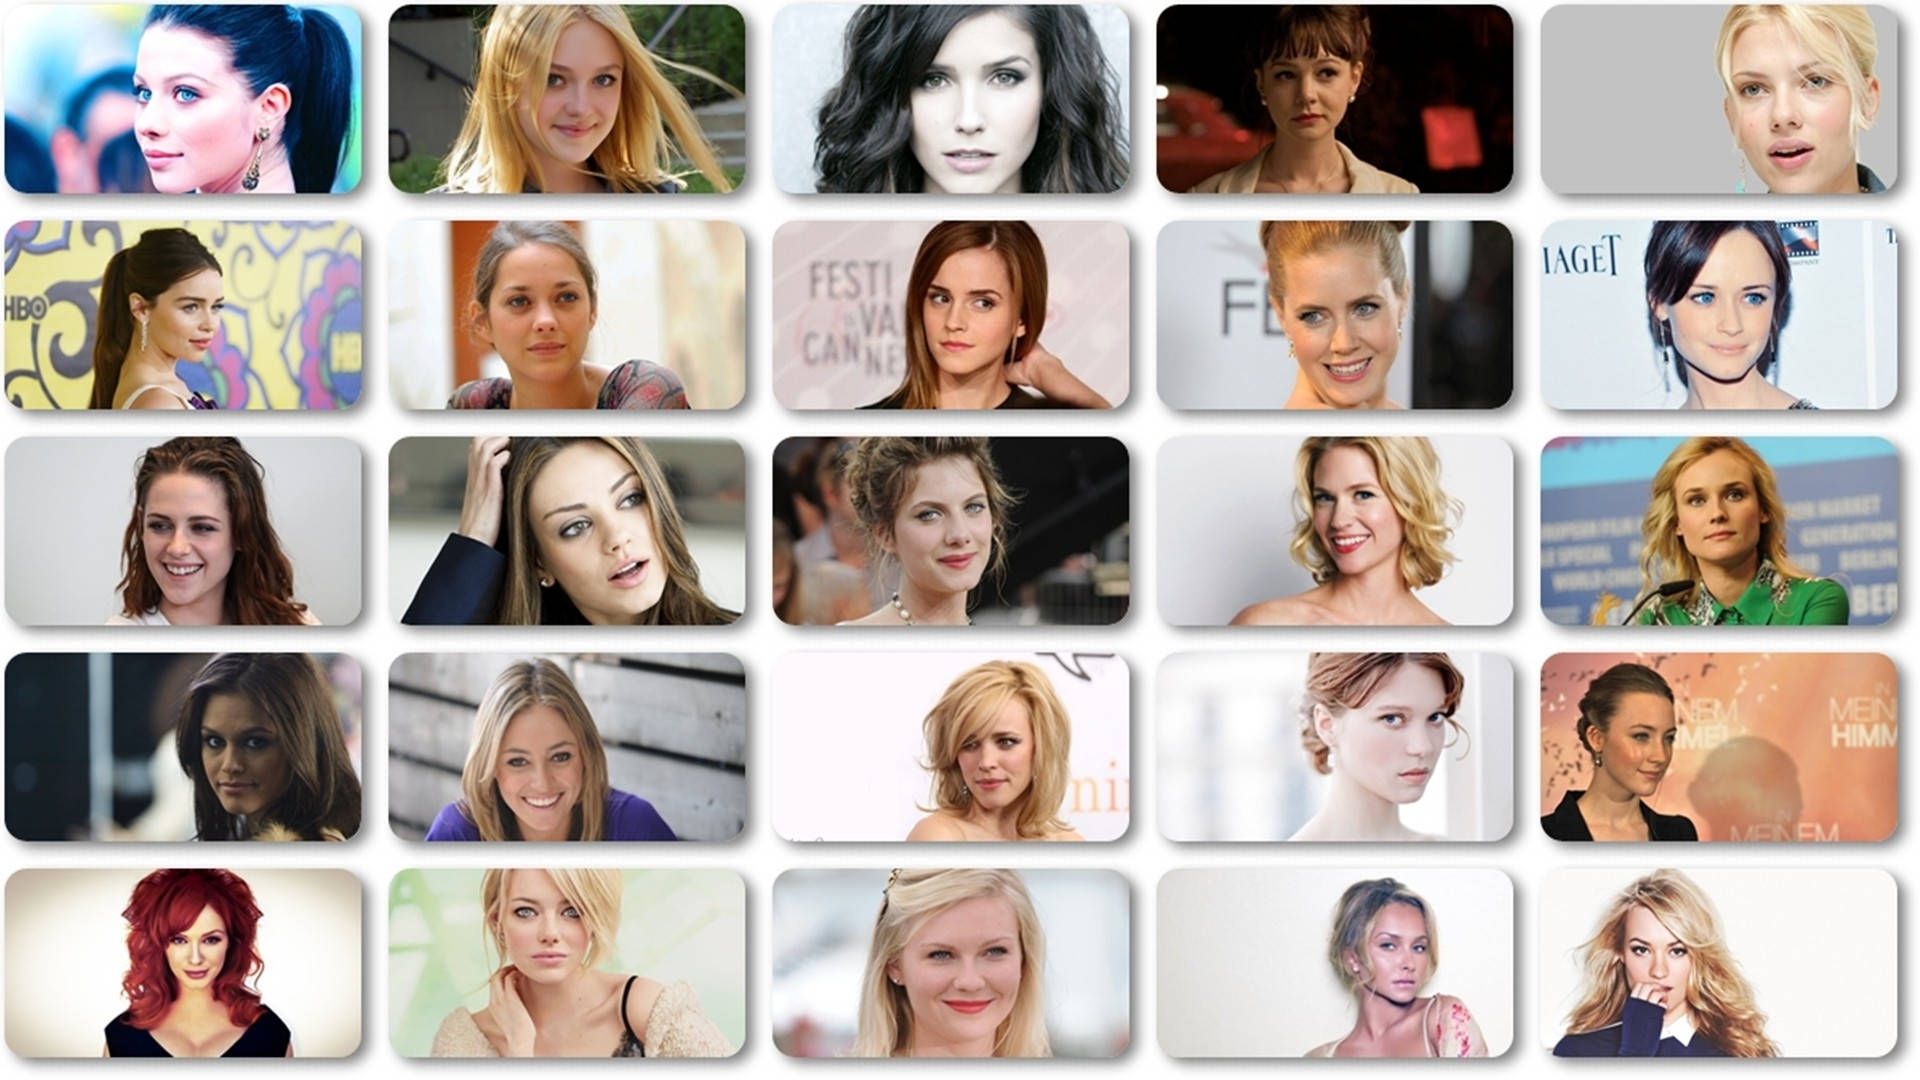 January Jones Hollywood Actresses Photo Collage Wallpaper